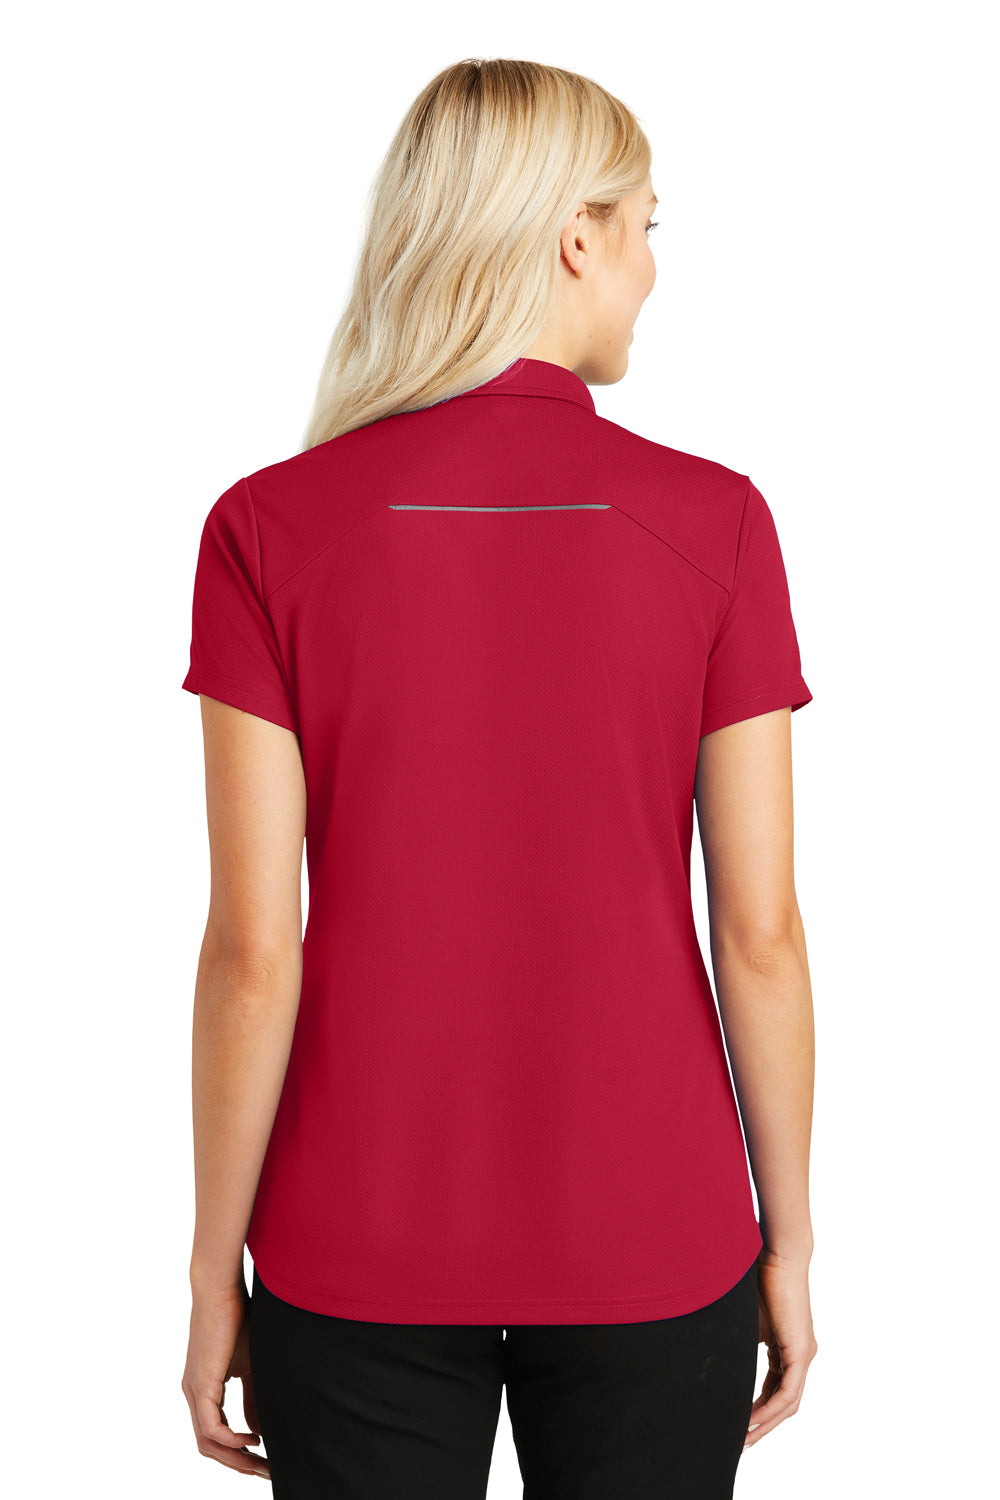 Port Authority L580 Womens Moisture Wicking Short Sleeve Polo Shirt Red Back